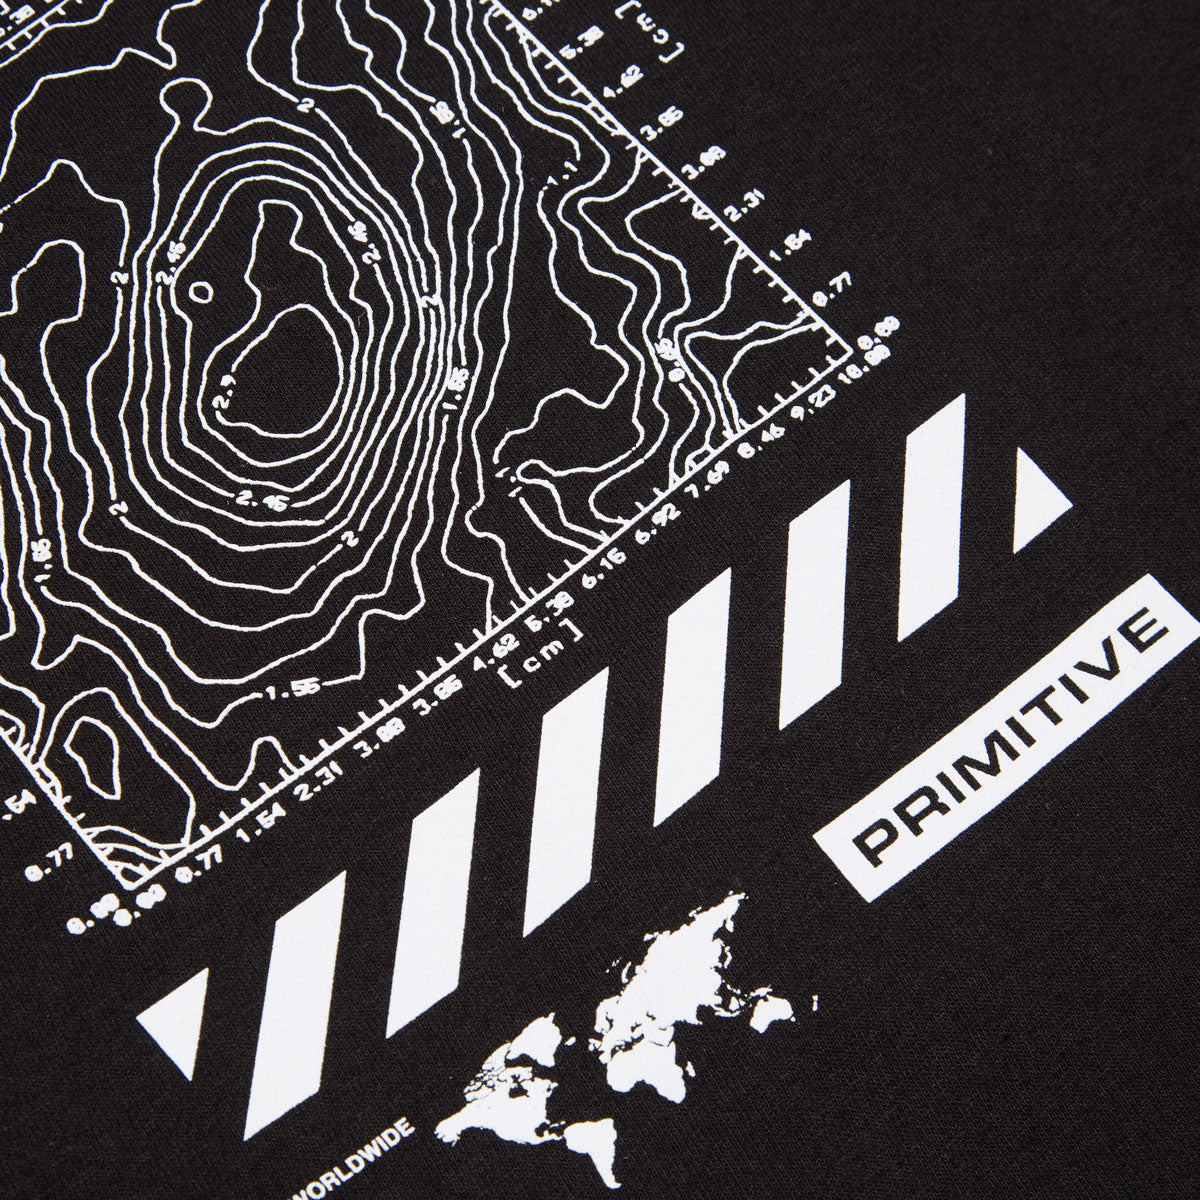 Primitive x Call Of Duty Mapping Dirty P T-Shirt - Black image 3